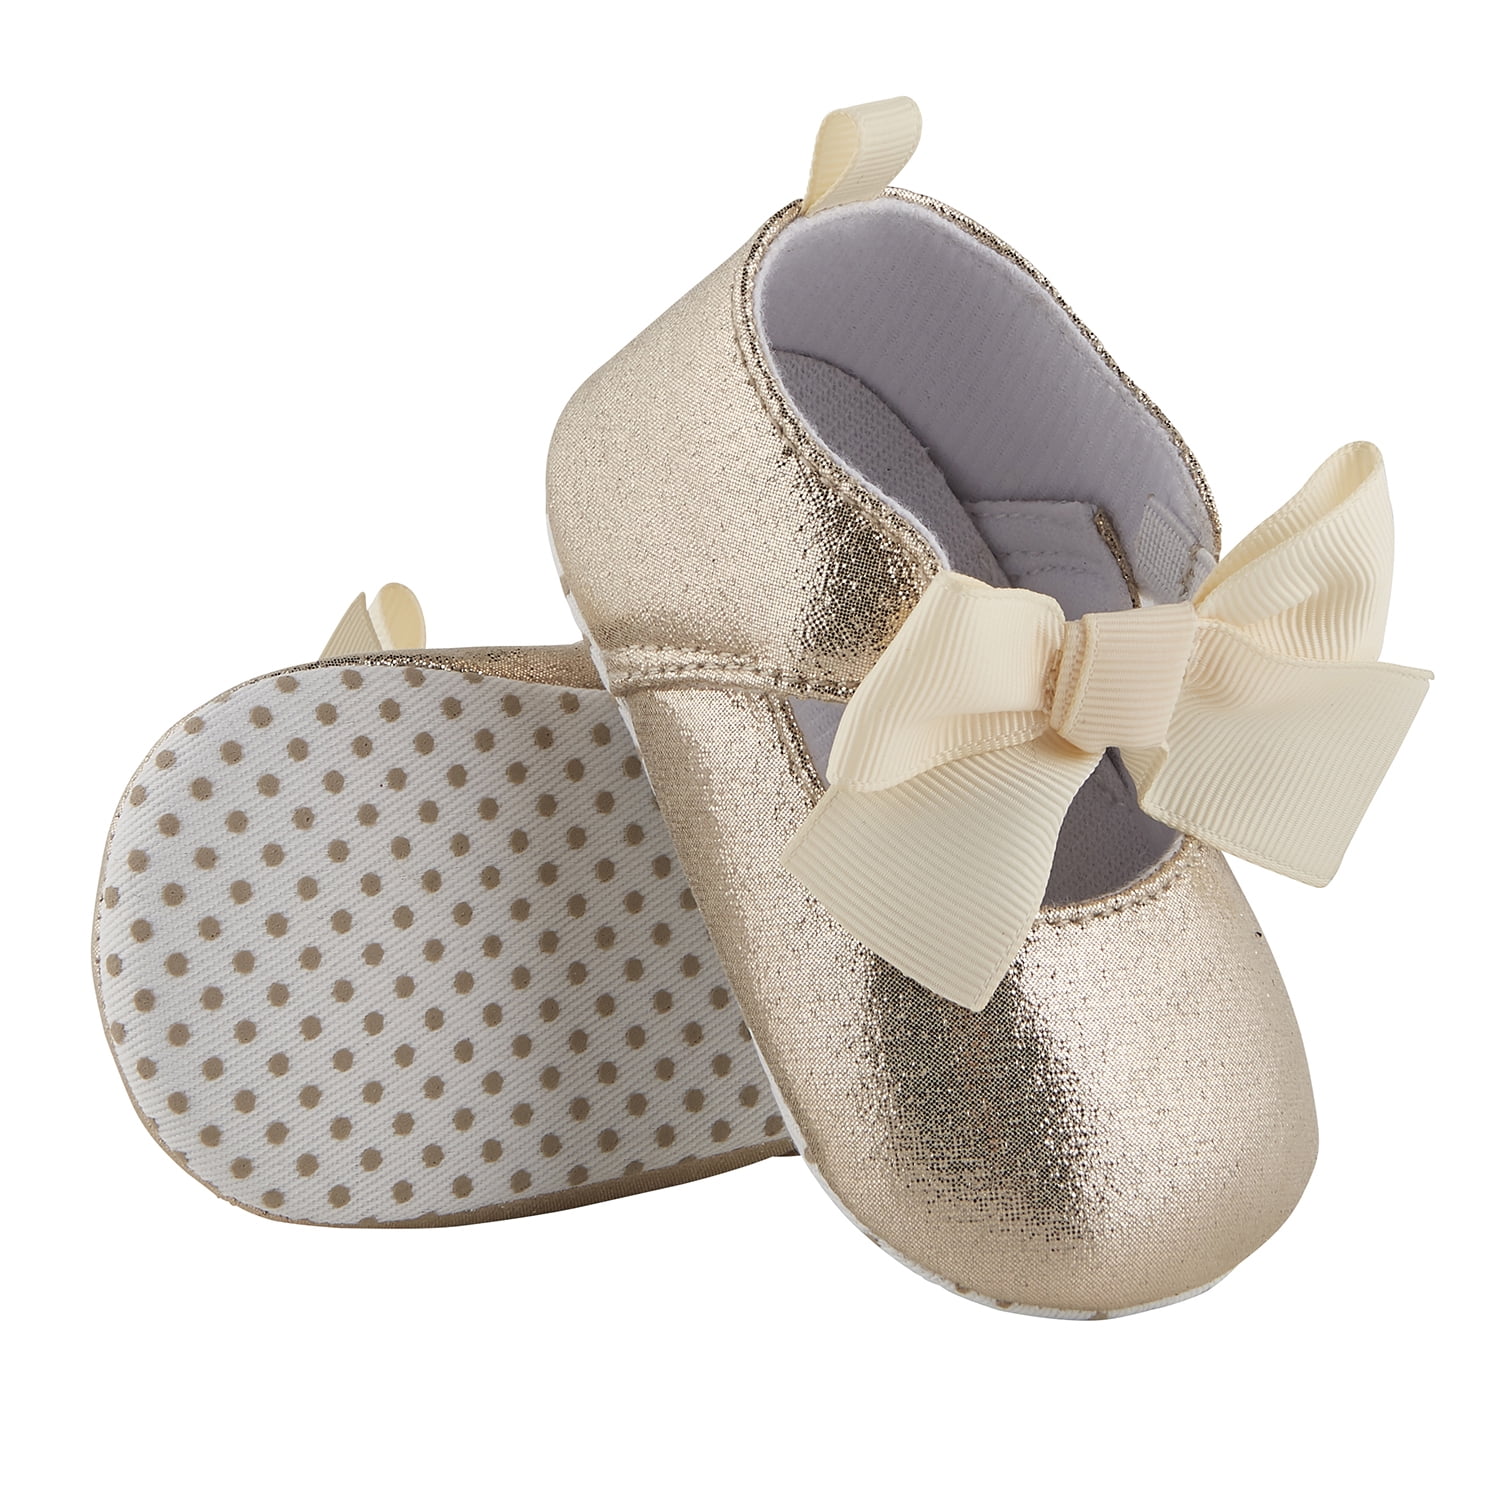 gold branded baby shoes